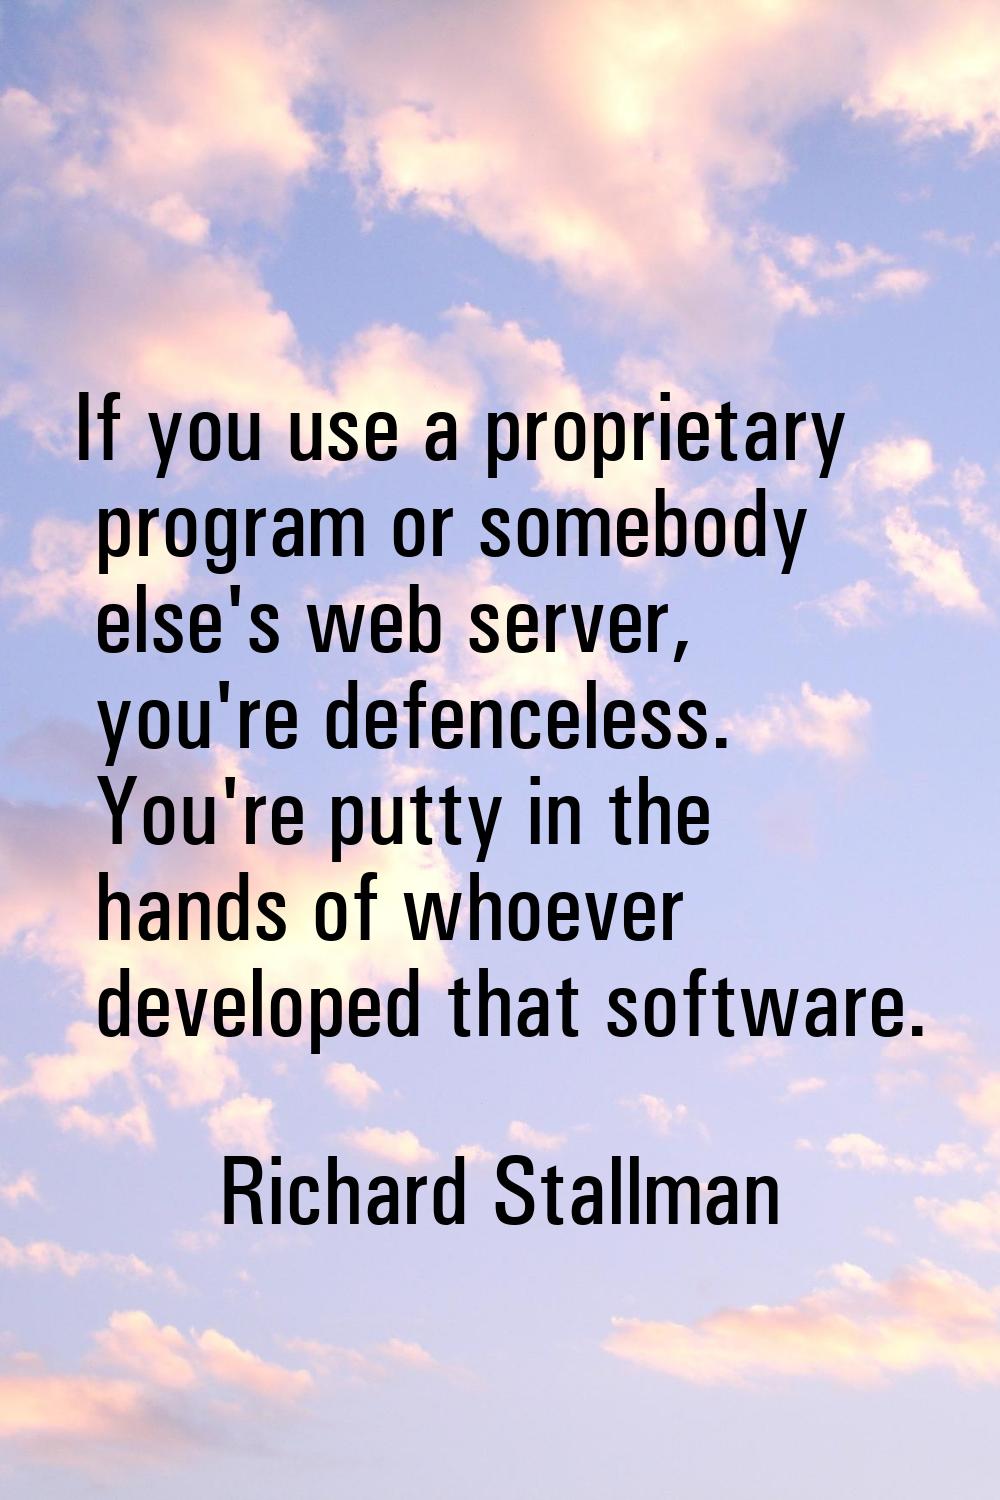 If you use a proprietary program or somebody else's web server, you're defenceless. You're putty in